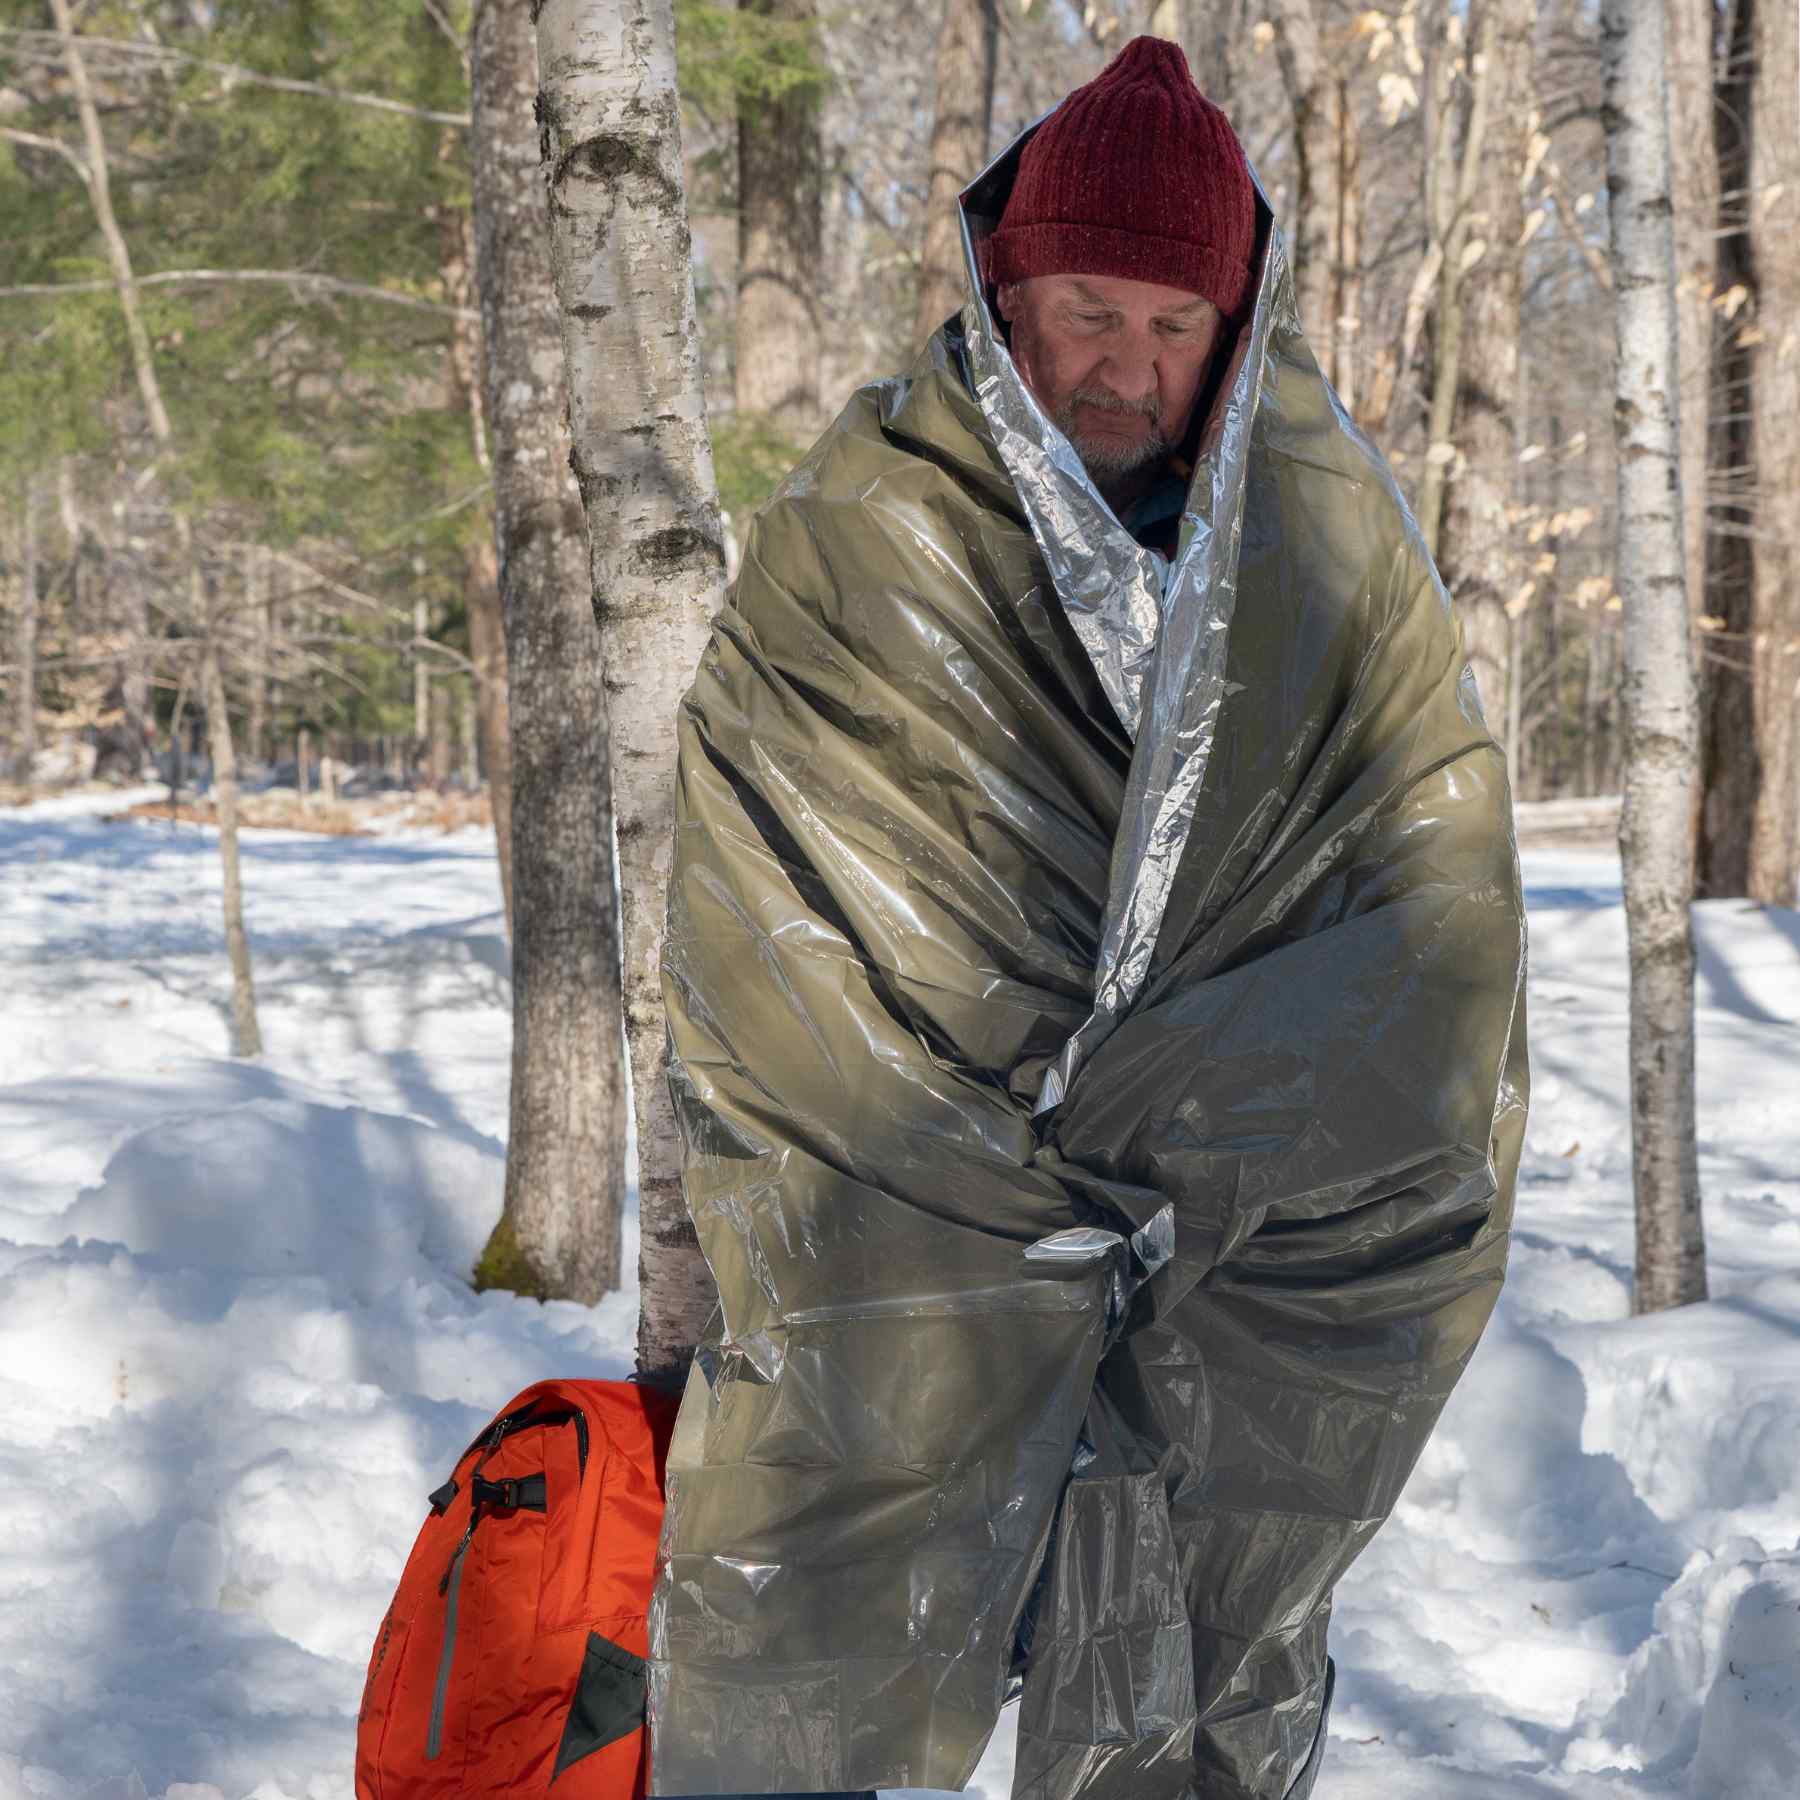 Almighty Equip:LYN All-Weather Heavy Duty Solar Emergency Survival, Snow&Pet